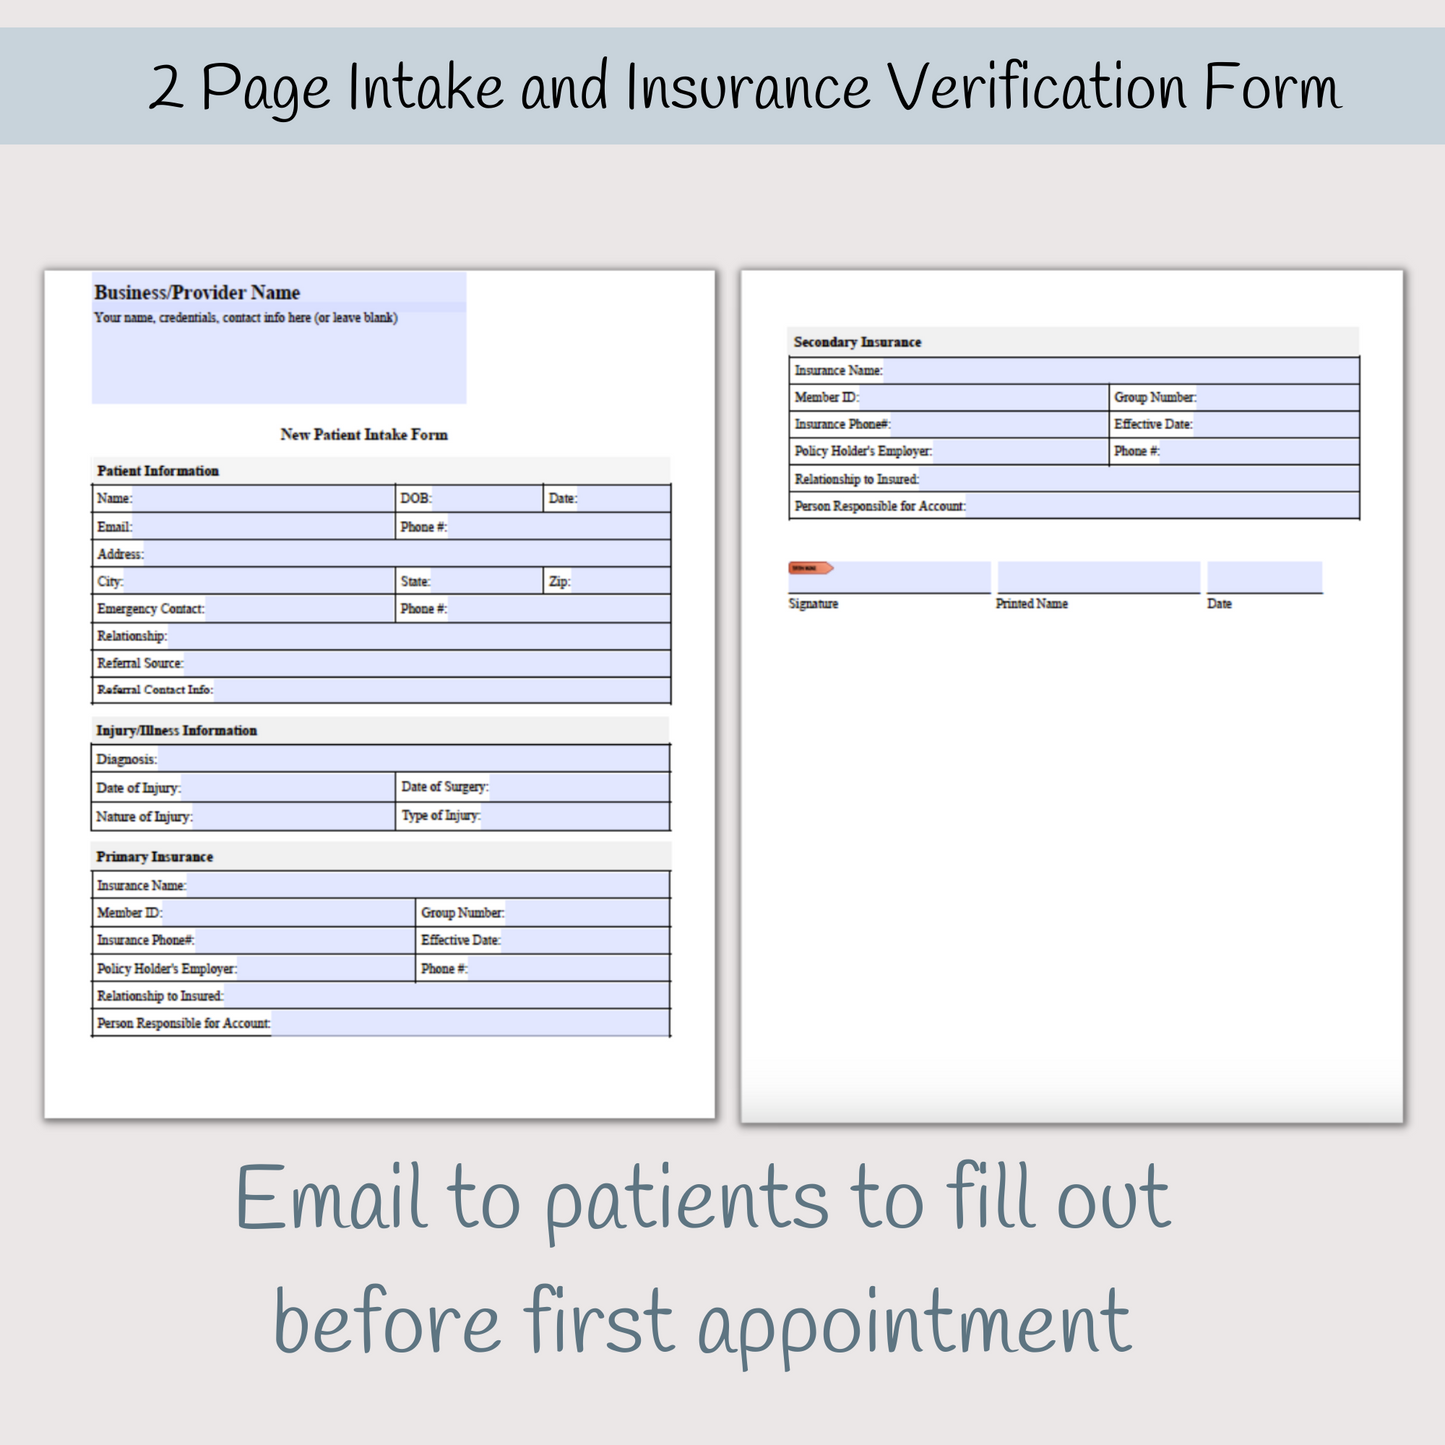 Insurance Verification Form for Physical Therapy Office